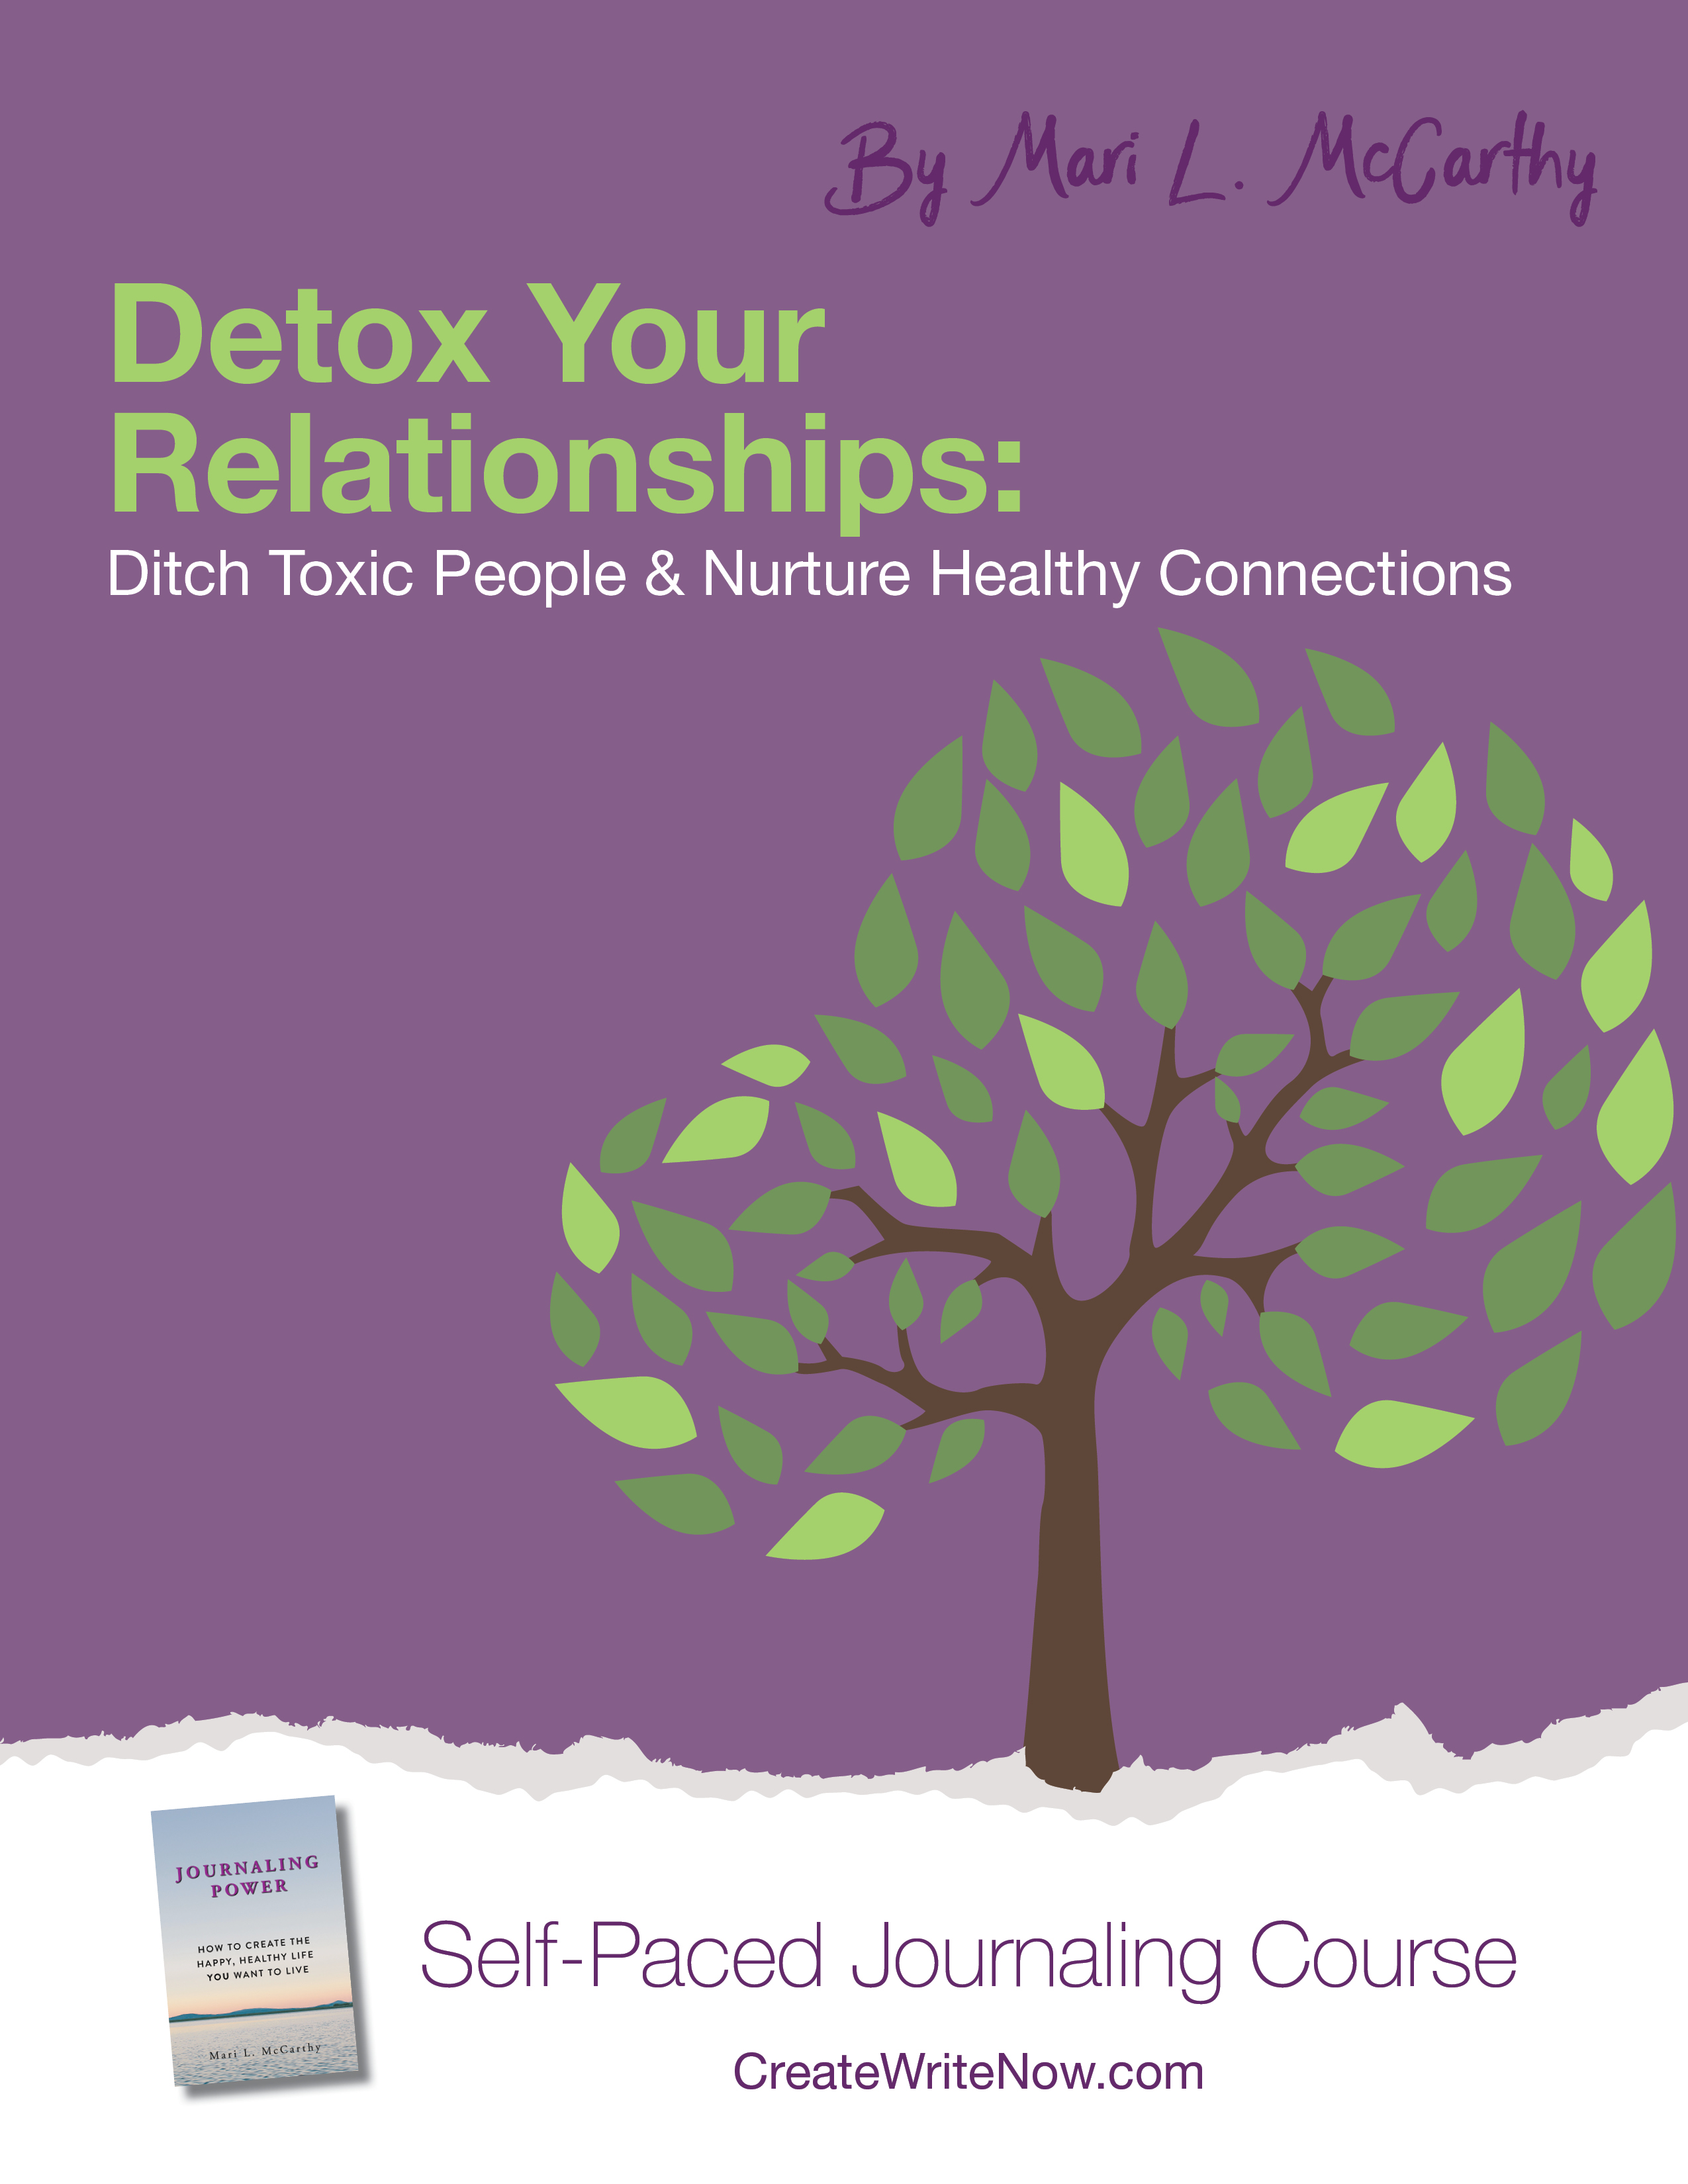 Detox Your Relationships This Valentine’s Day